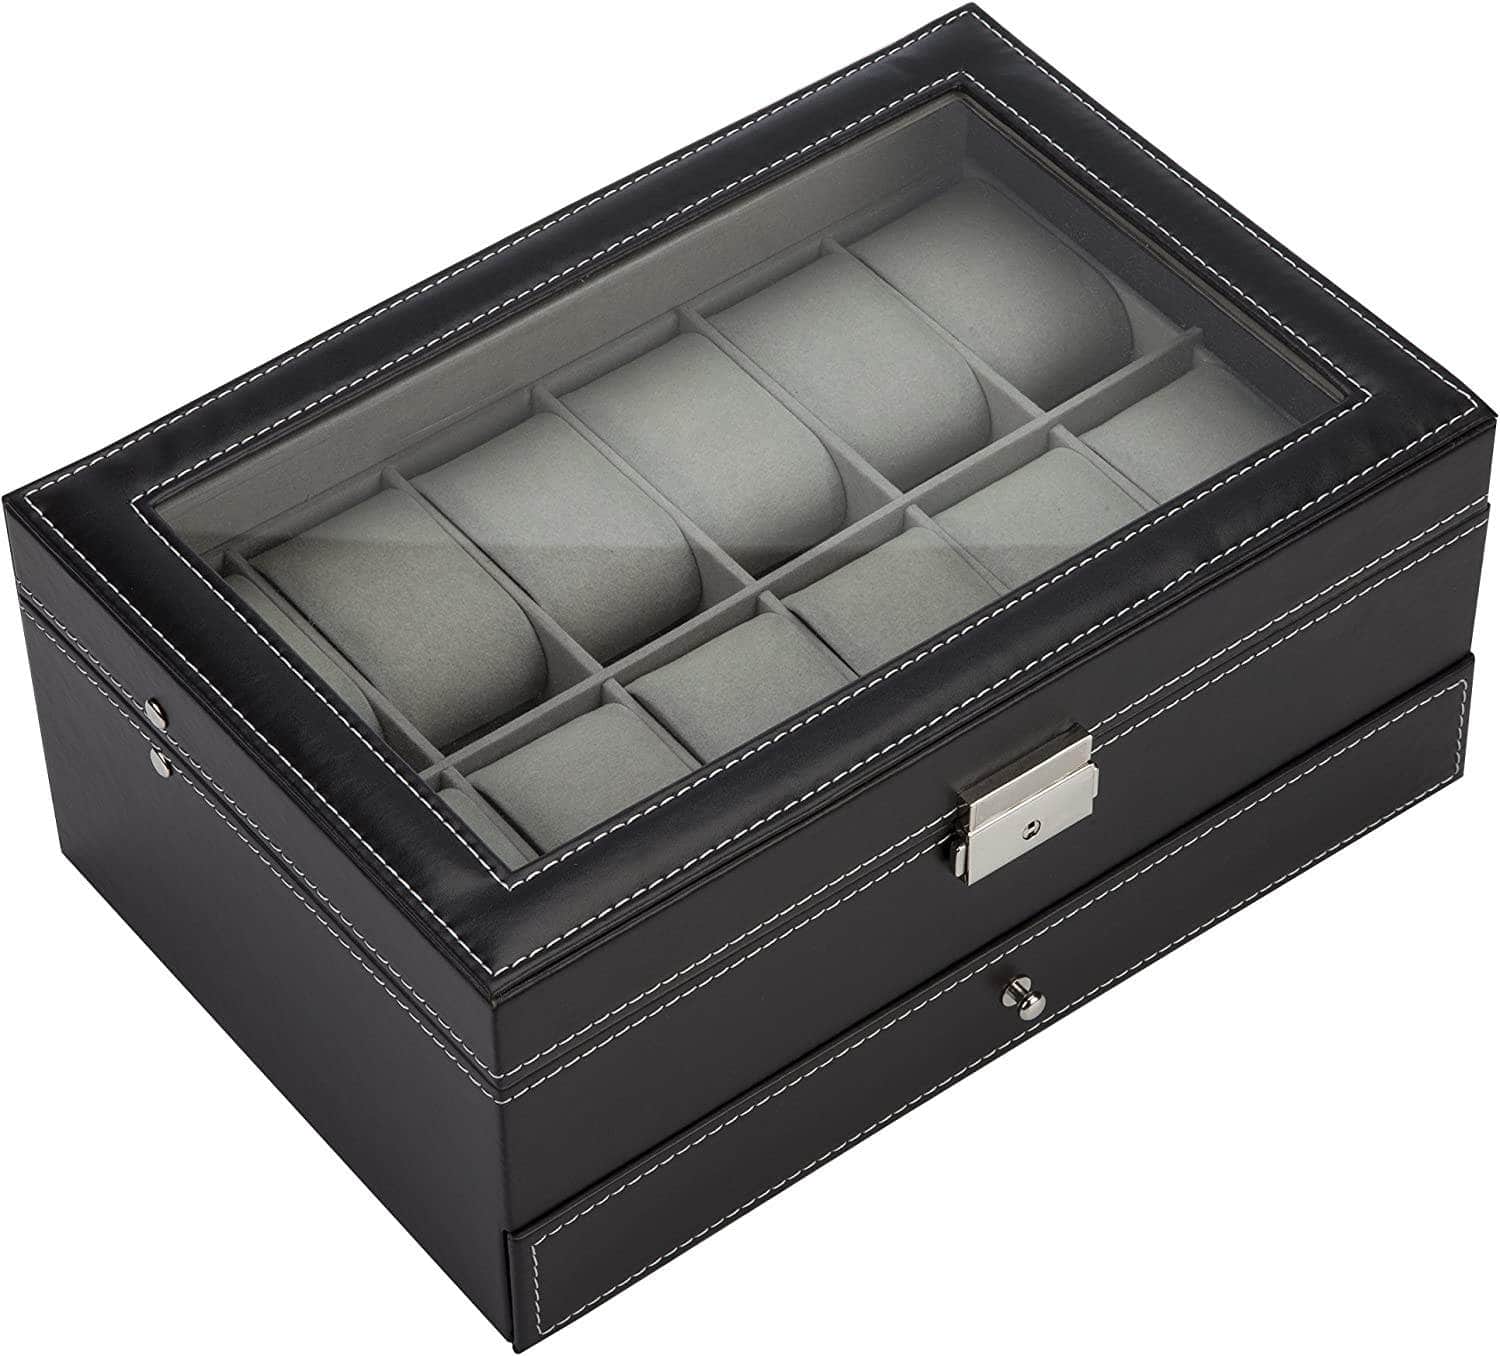 Black Leather Watch Box Jewelry Display Case with Drawers 12 Slots with 2 Layers